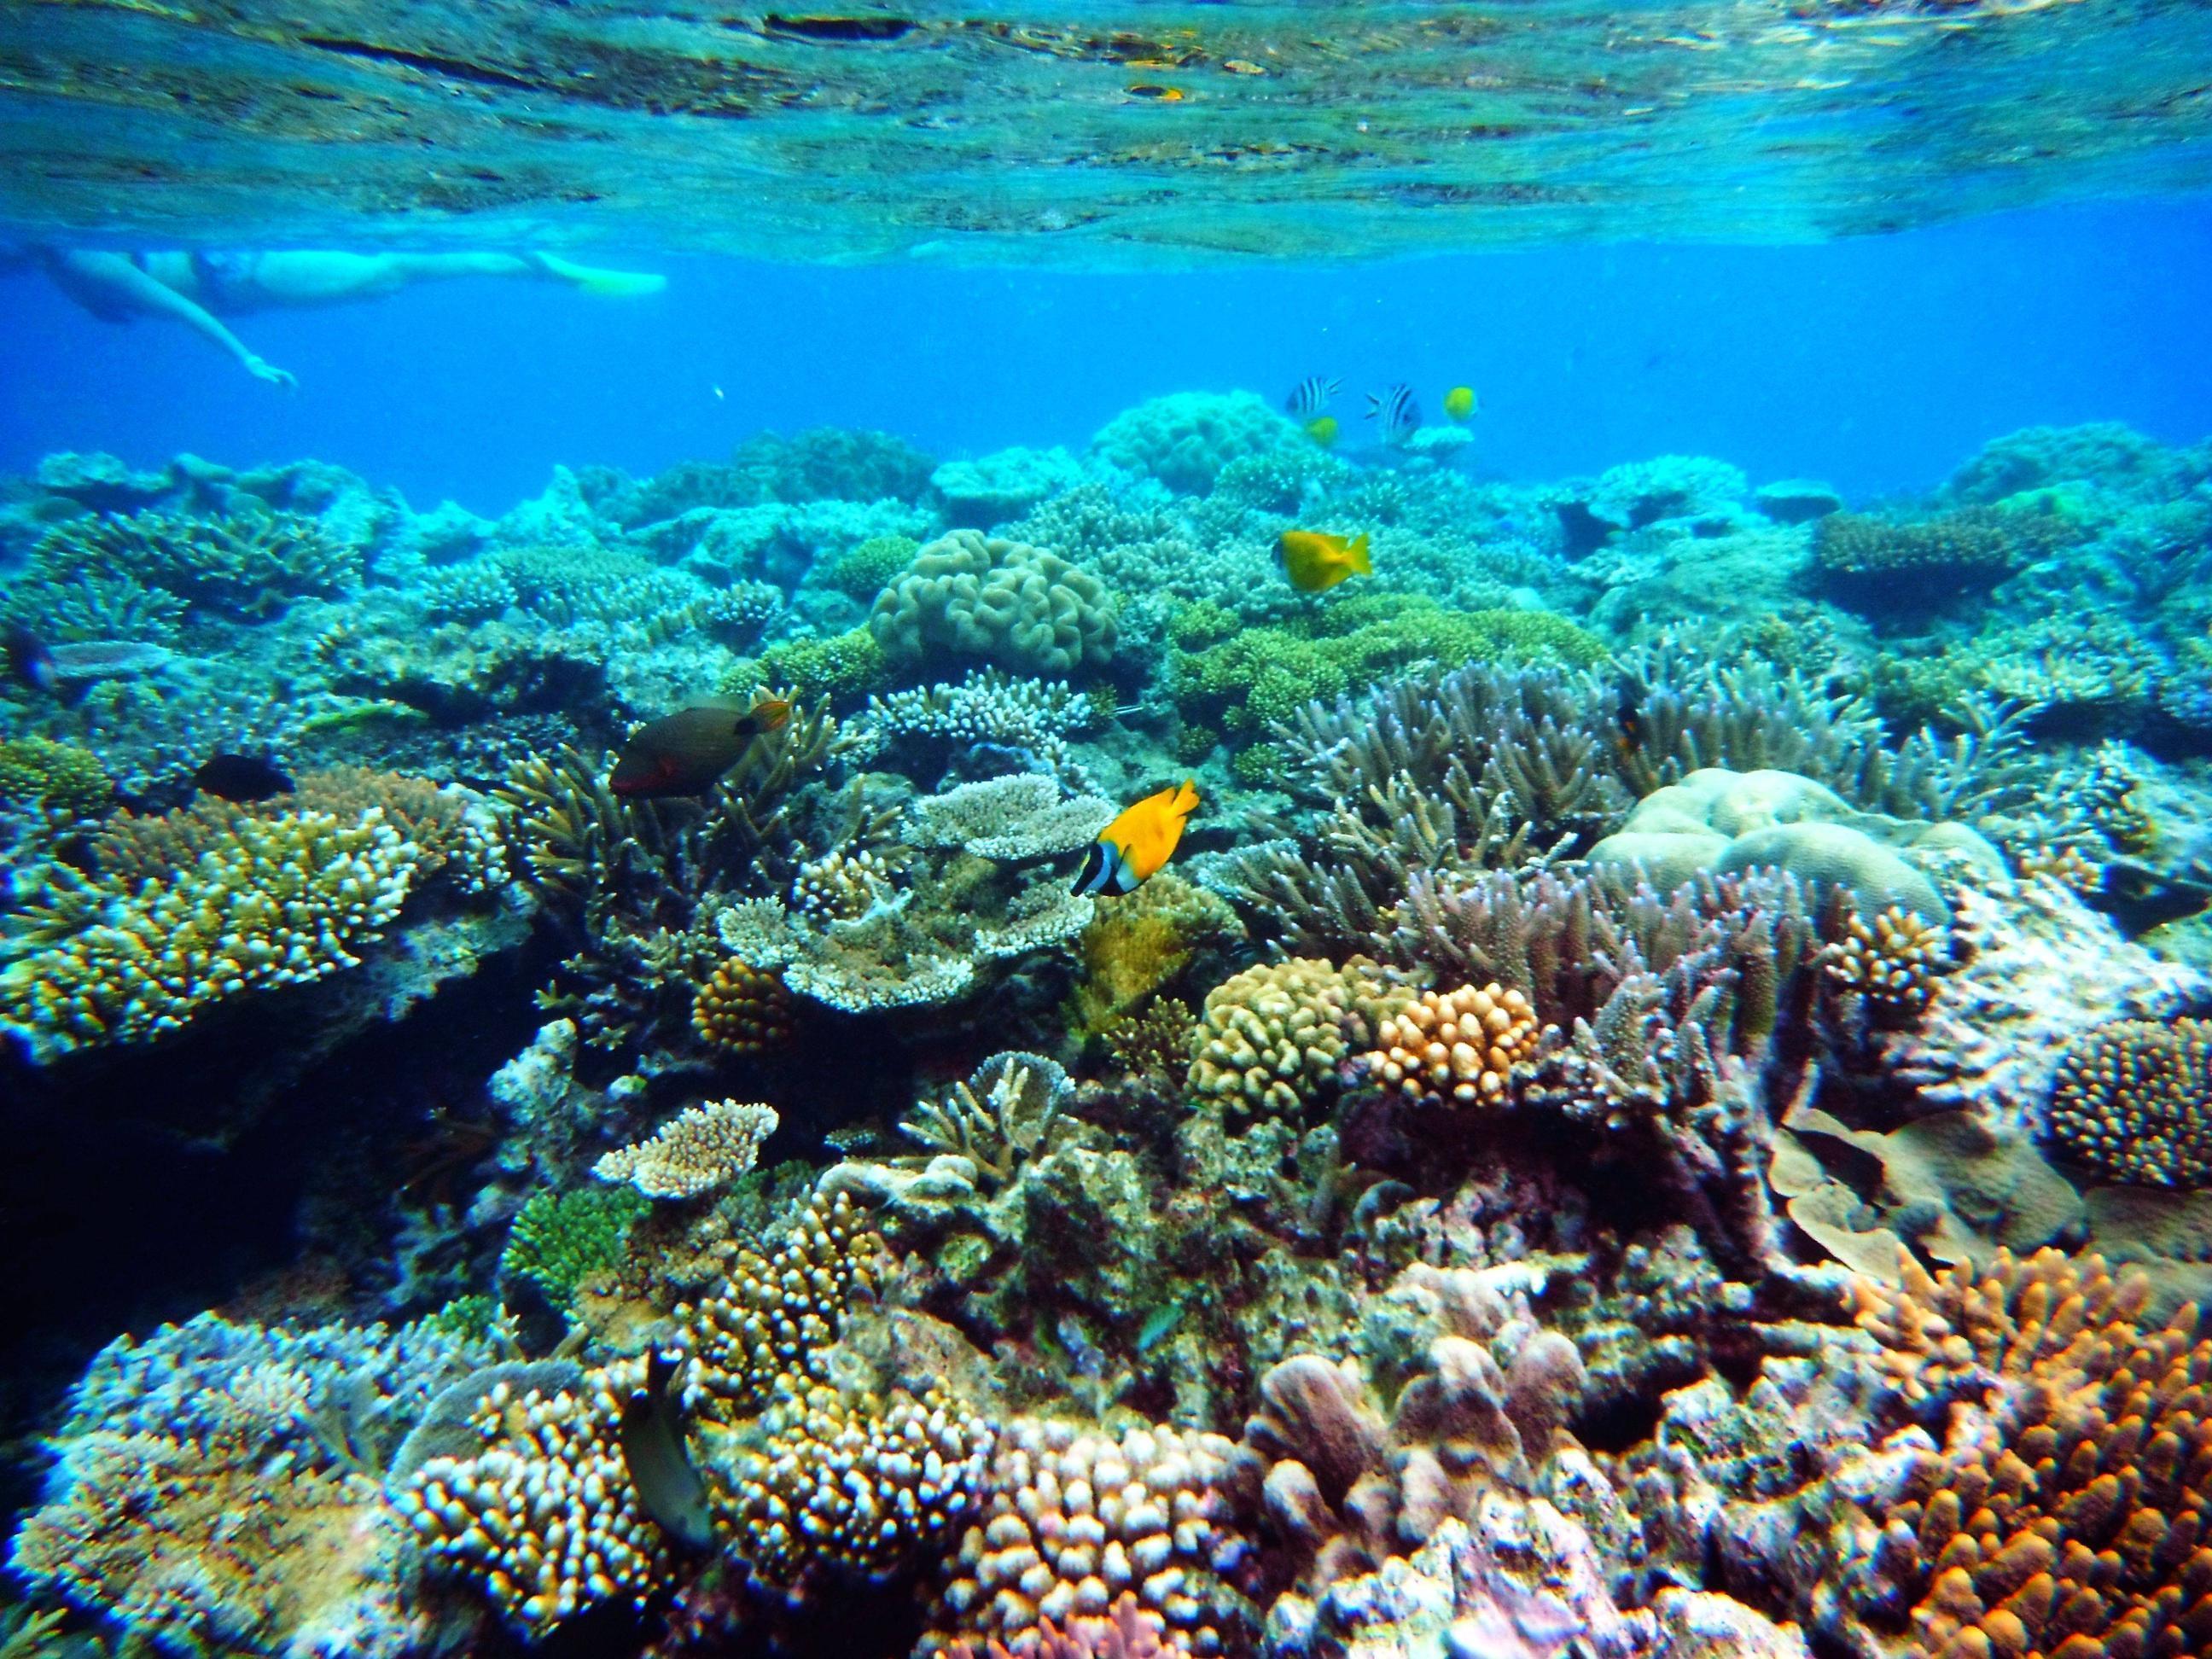 Great Barrier Reef Wallpapers - Top Free Great Barrier Reef Backgrounds ...